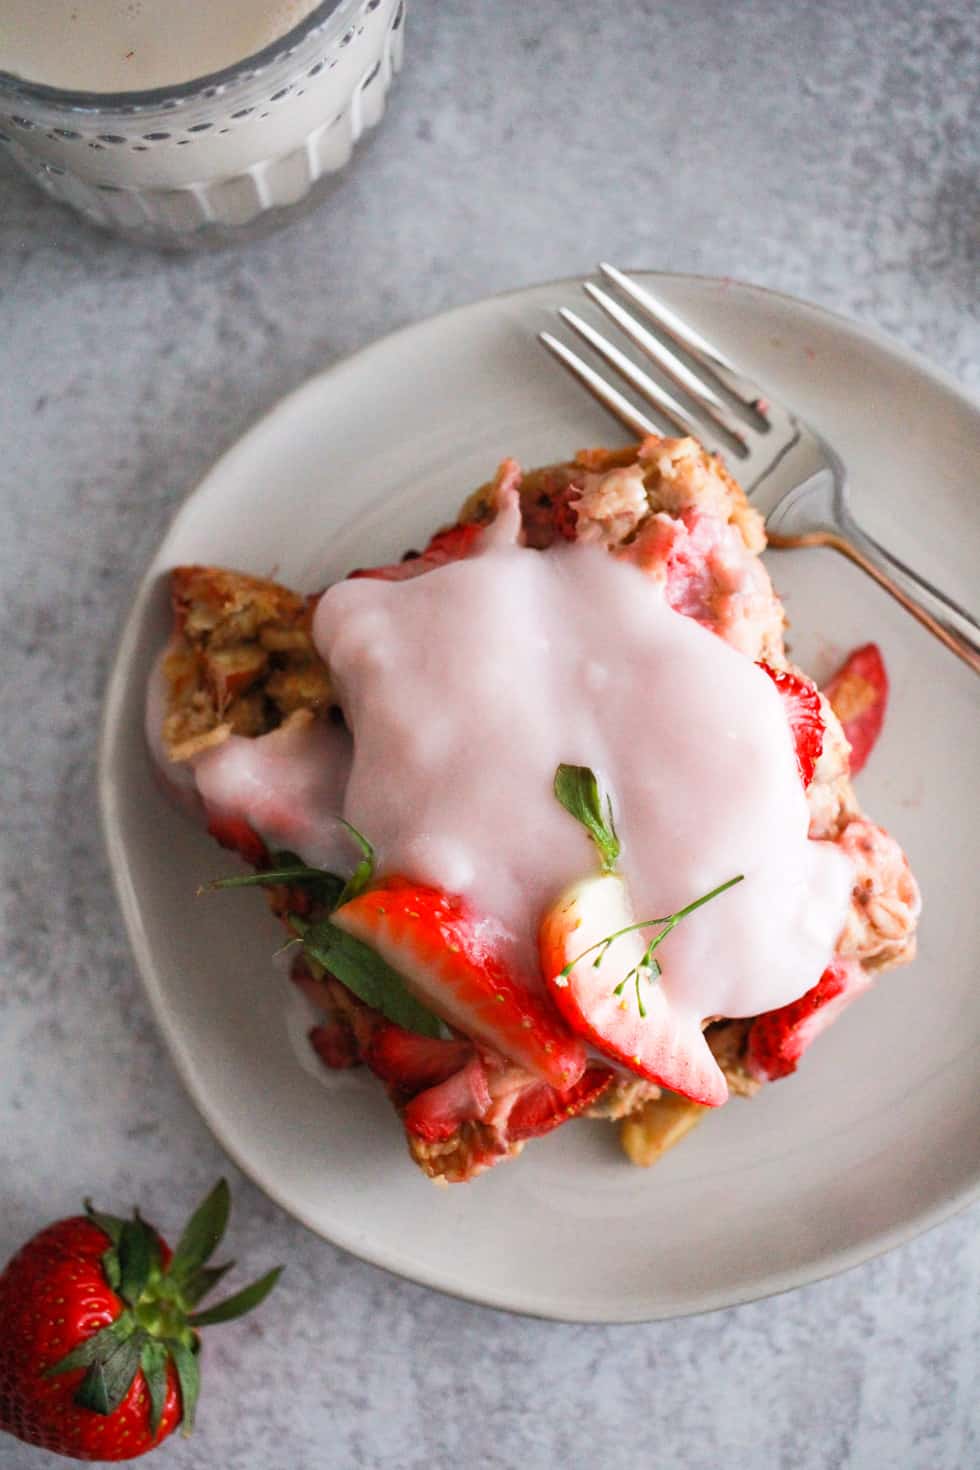 Piece of vegan baked oatmeal with strawberries and yogurt.